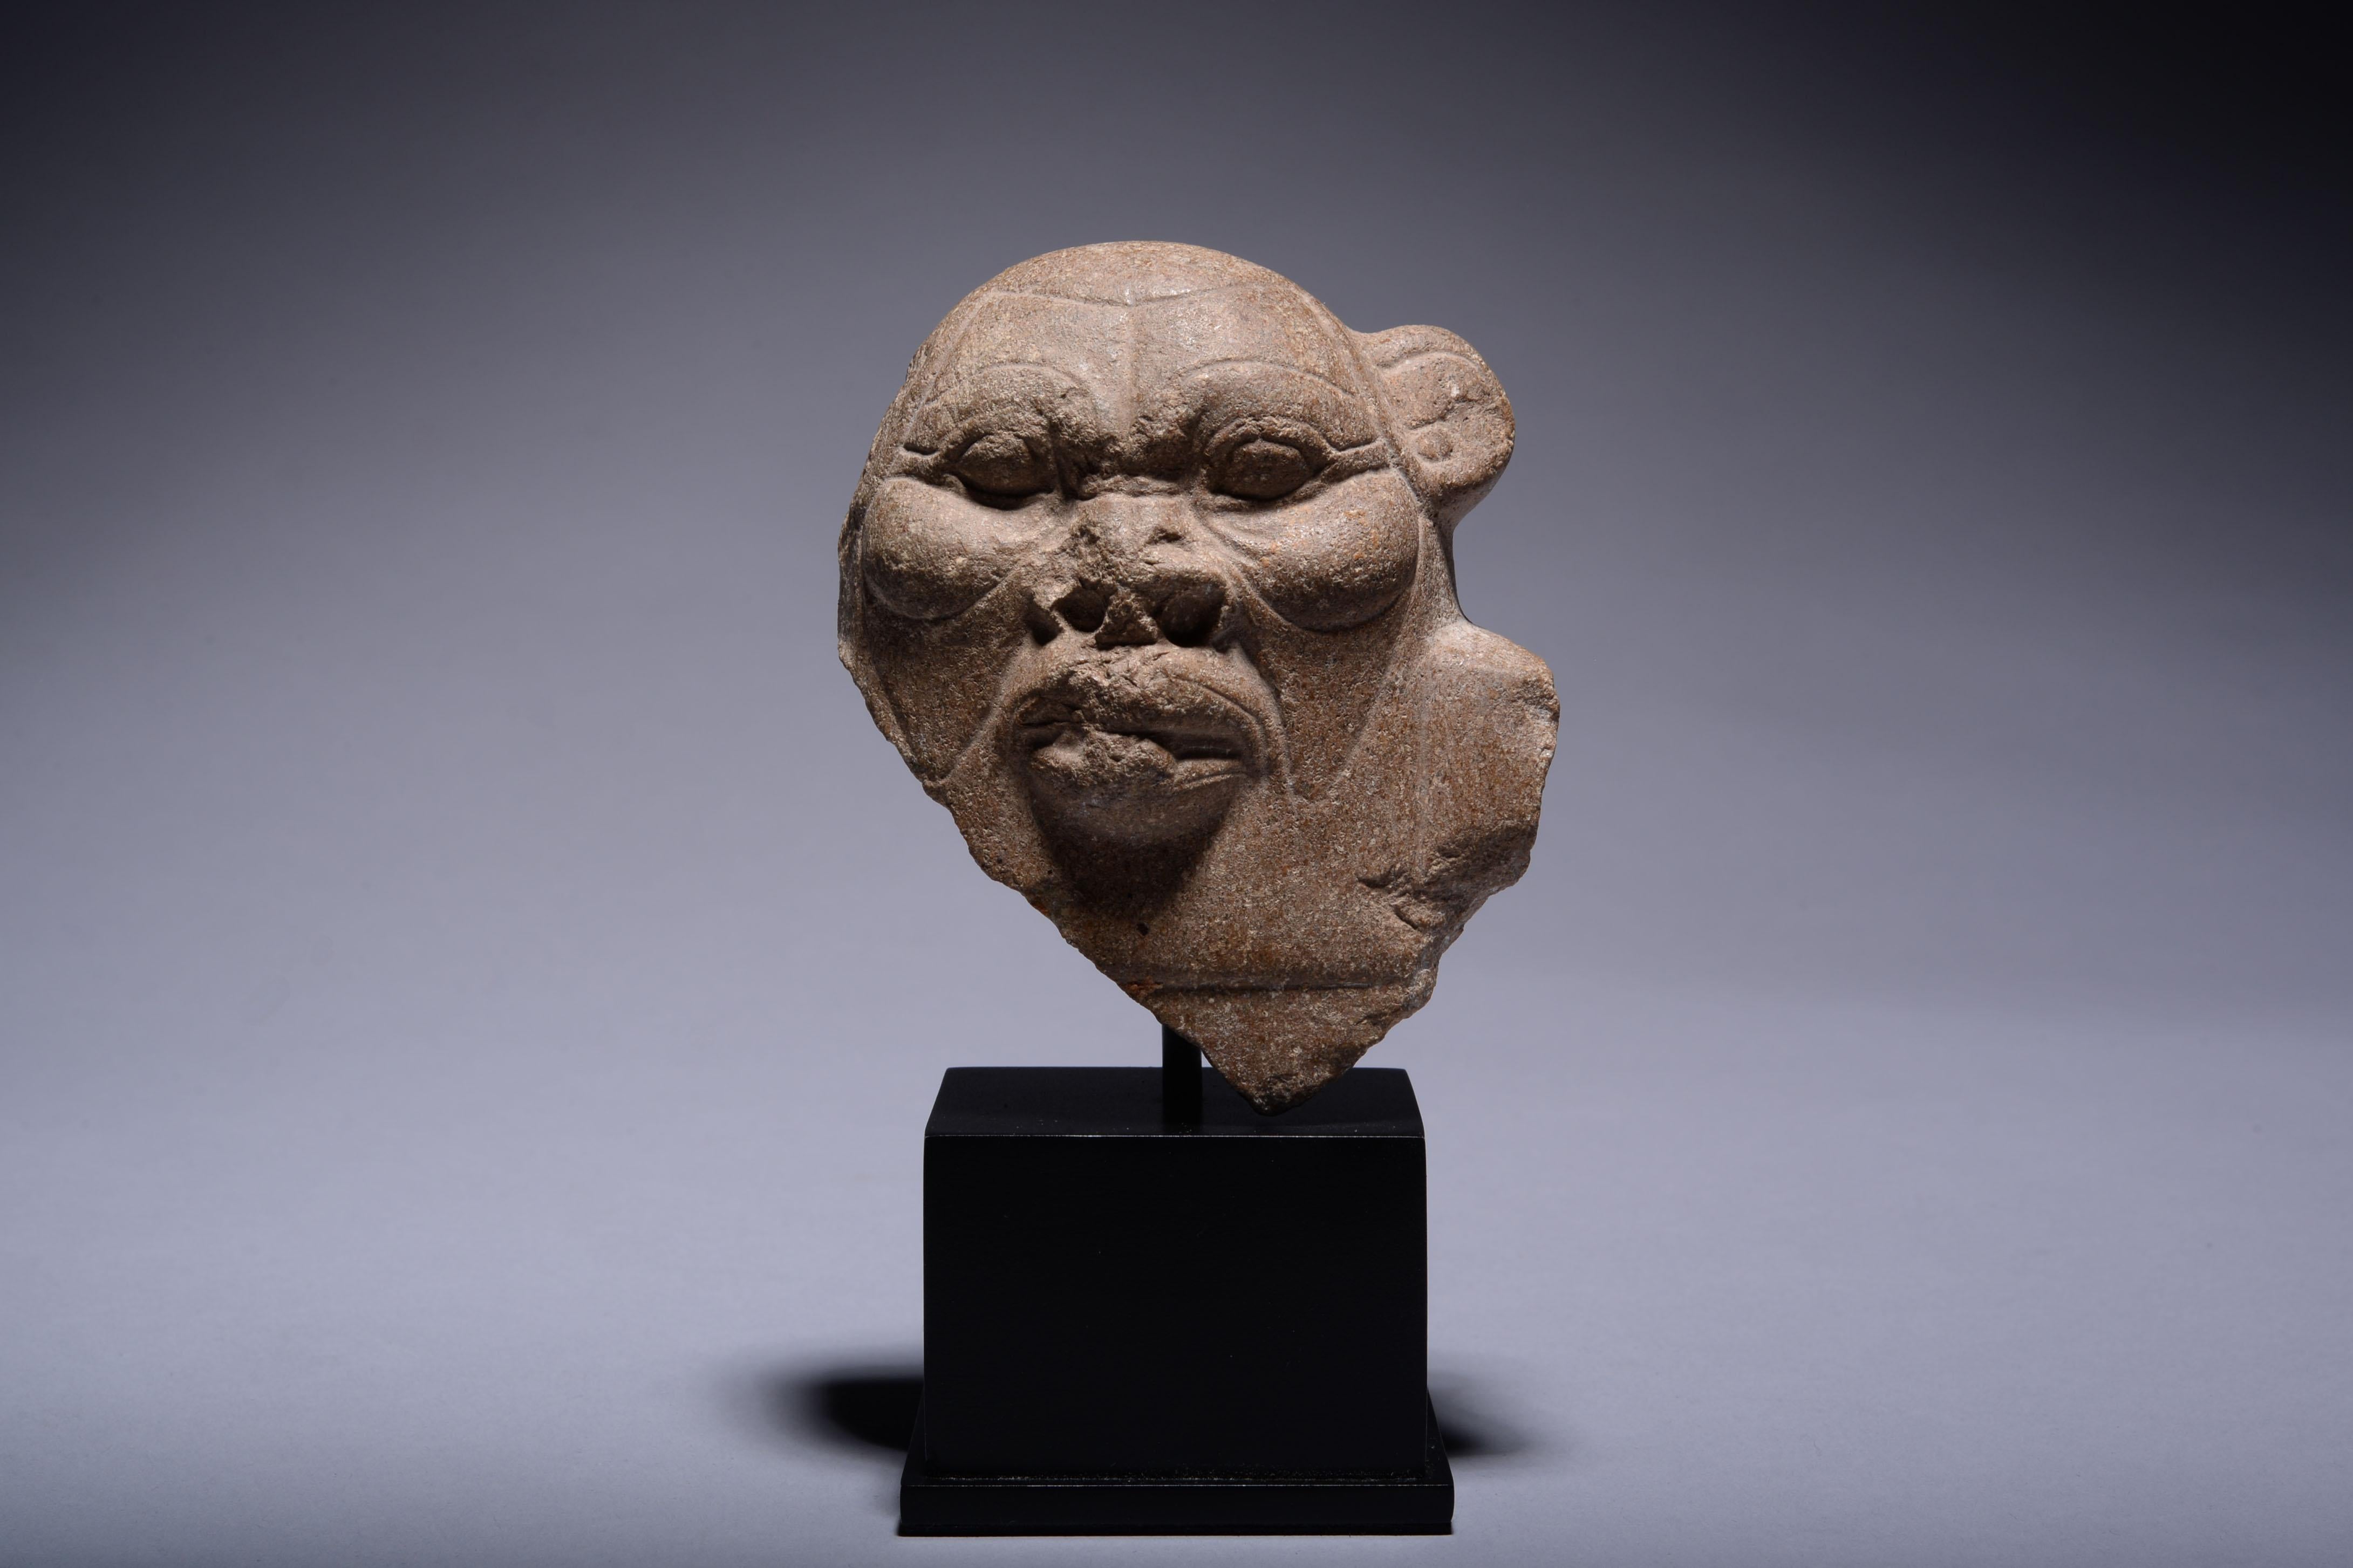 Quartzite bust of Bes, guardian of the household, patron of childbirth and god of war. Dating to Egypt's Ptolemaic Period, circa 332 - 30 BC. 

The rounded head with large, oval eyes, prominent cheeks and broad, furrowed brow. The wide nose with